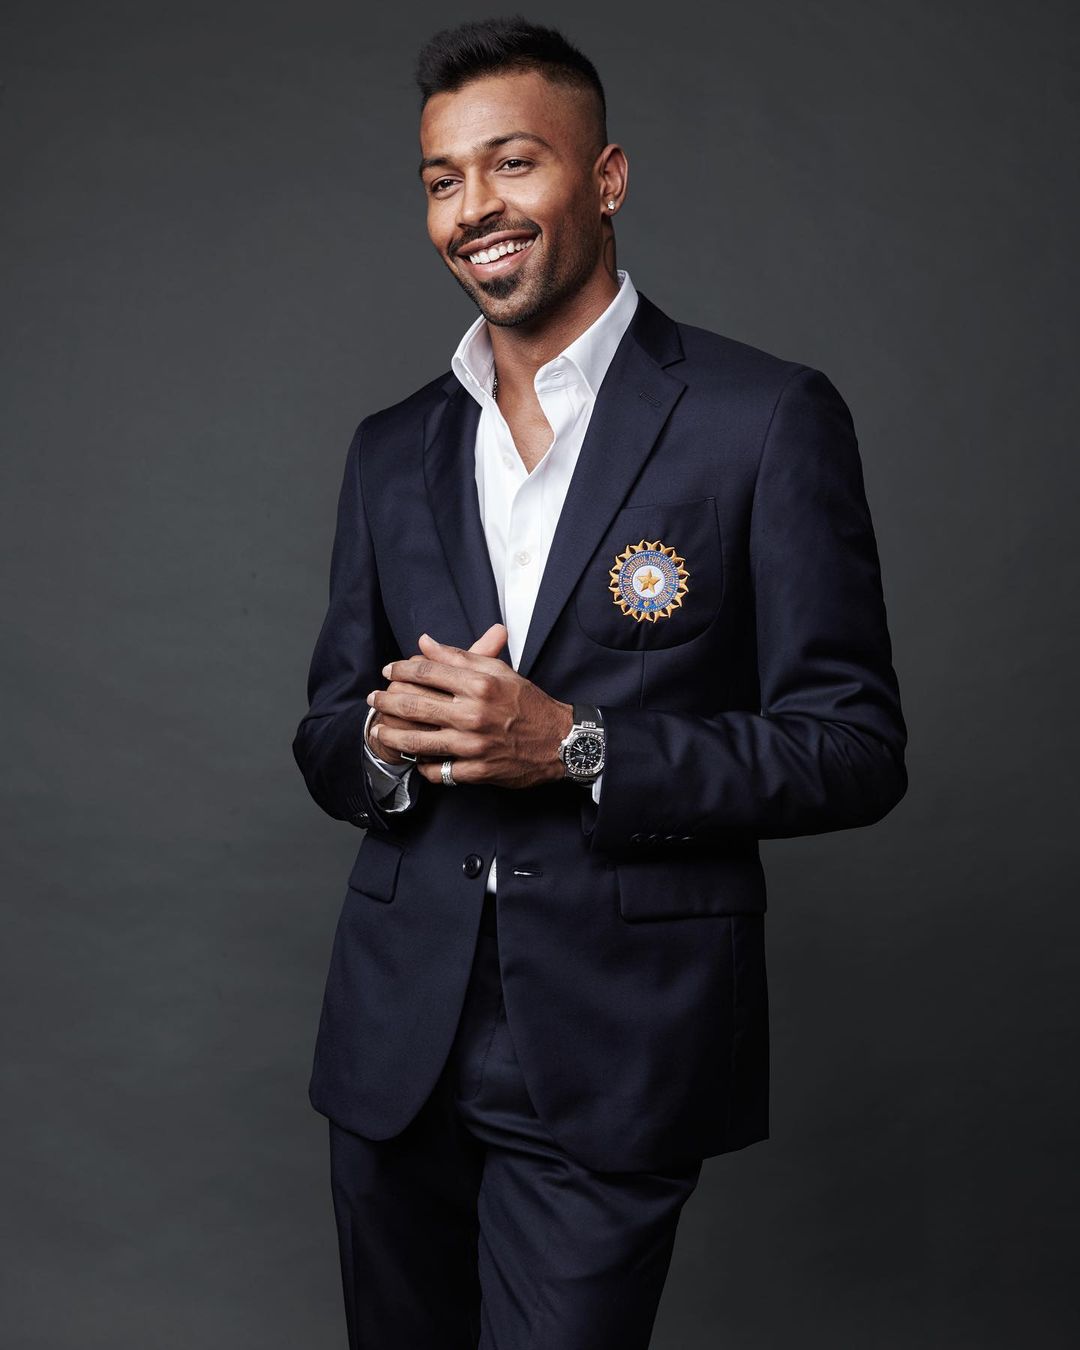 Hardik Pandya (Indian Cricketer) Biography, Wiki, Age, Height, Family,  Career, Awards, and Many More